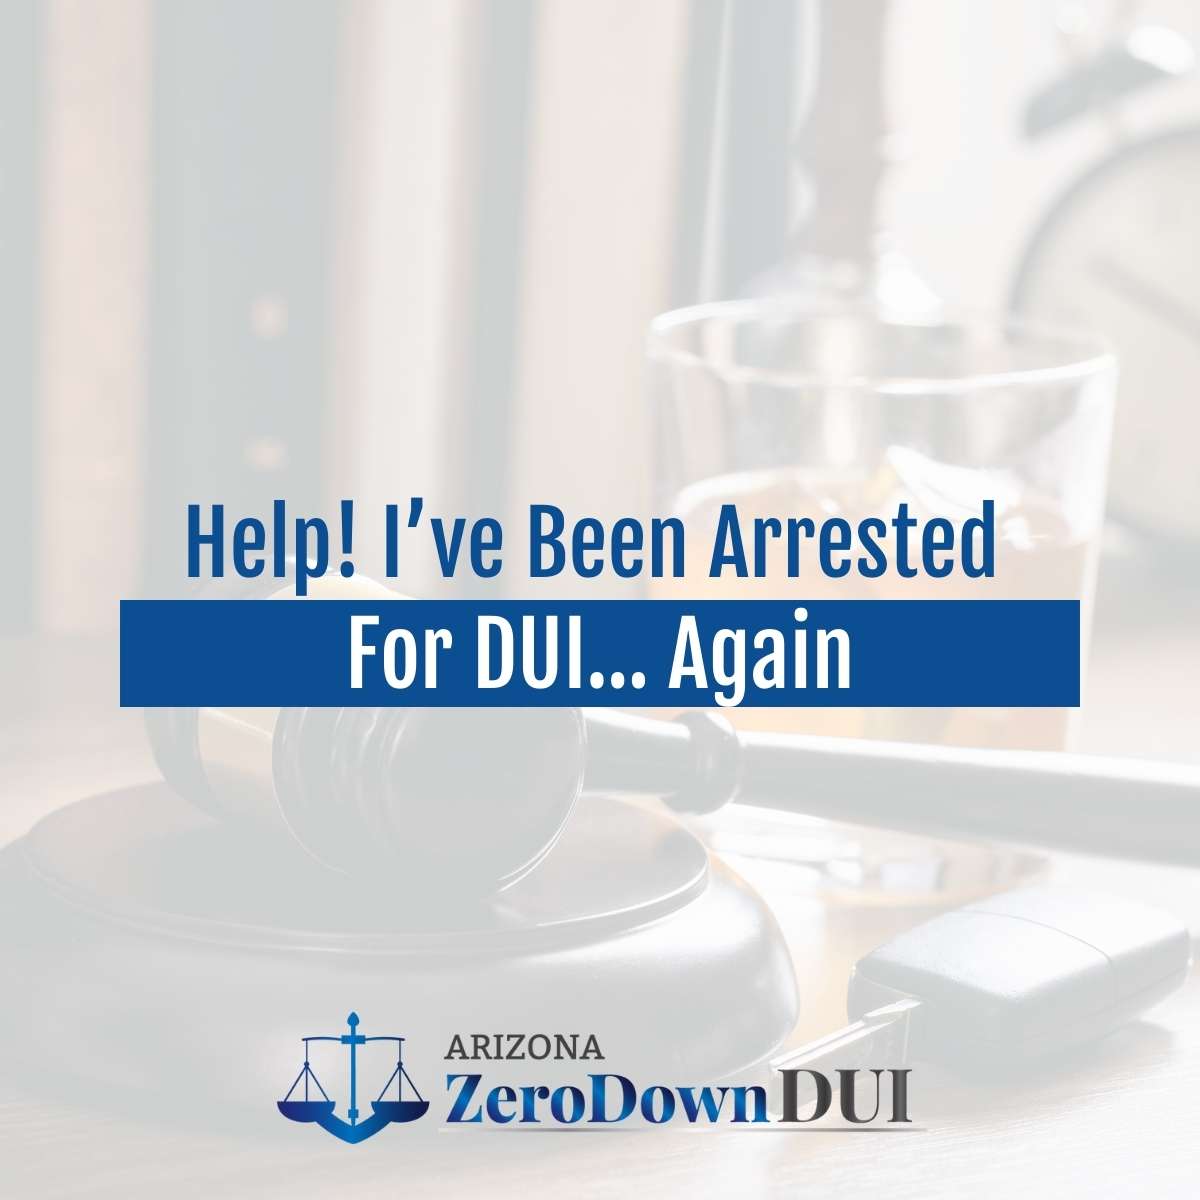 Arrested for DUI for the second time